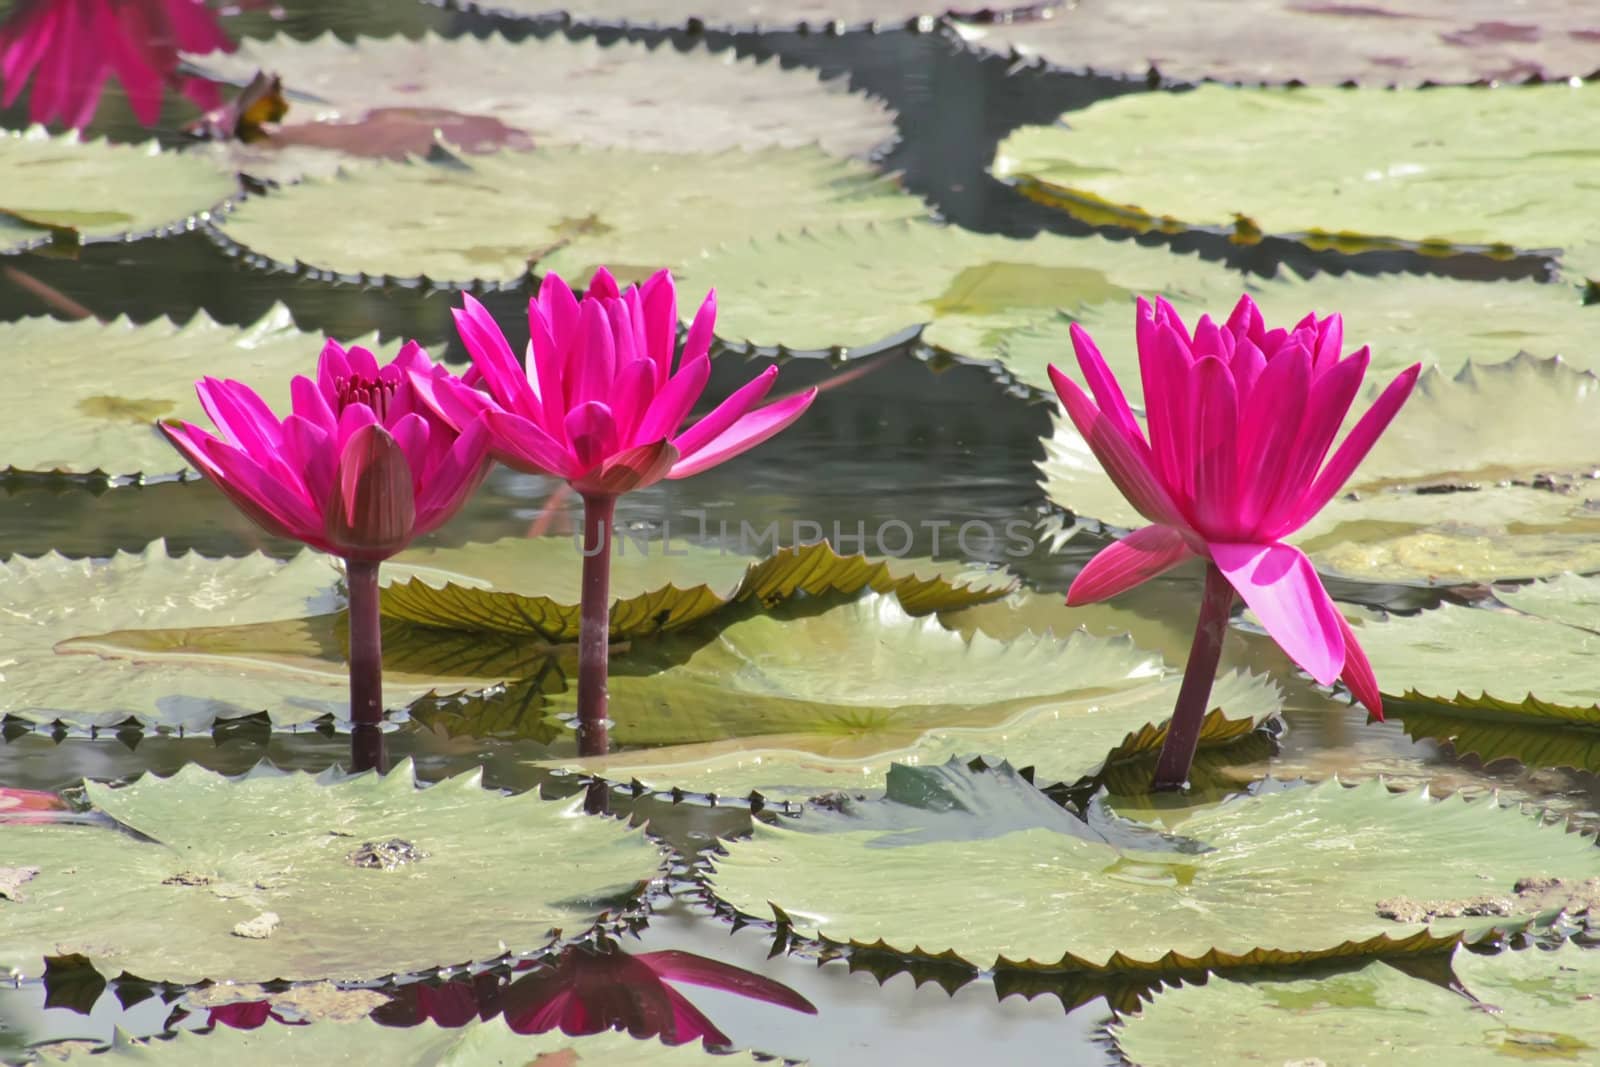 This image shows 3 pink water lily